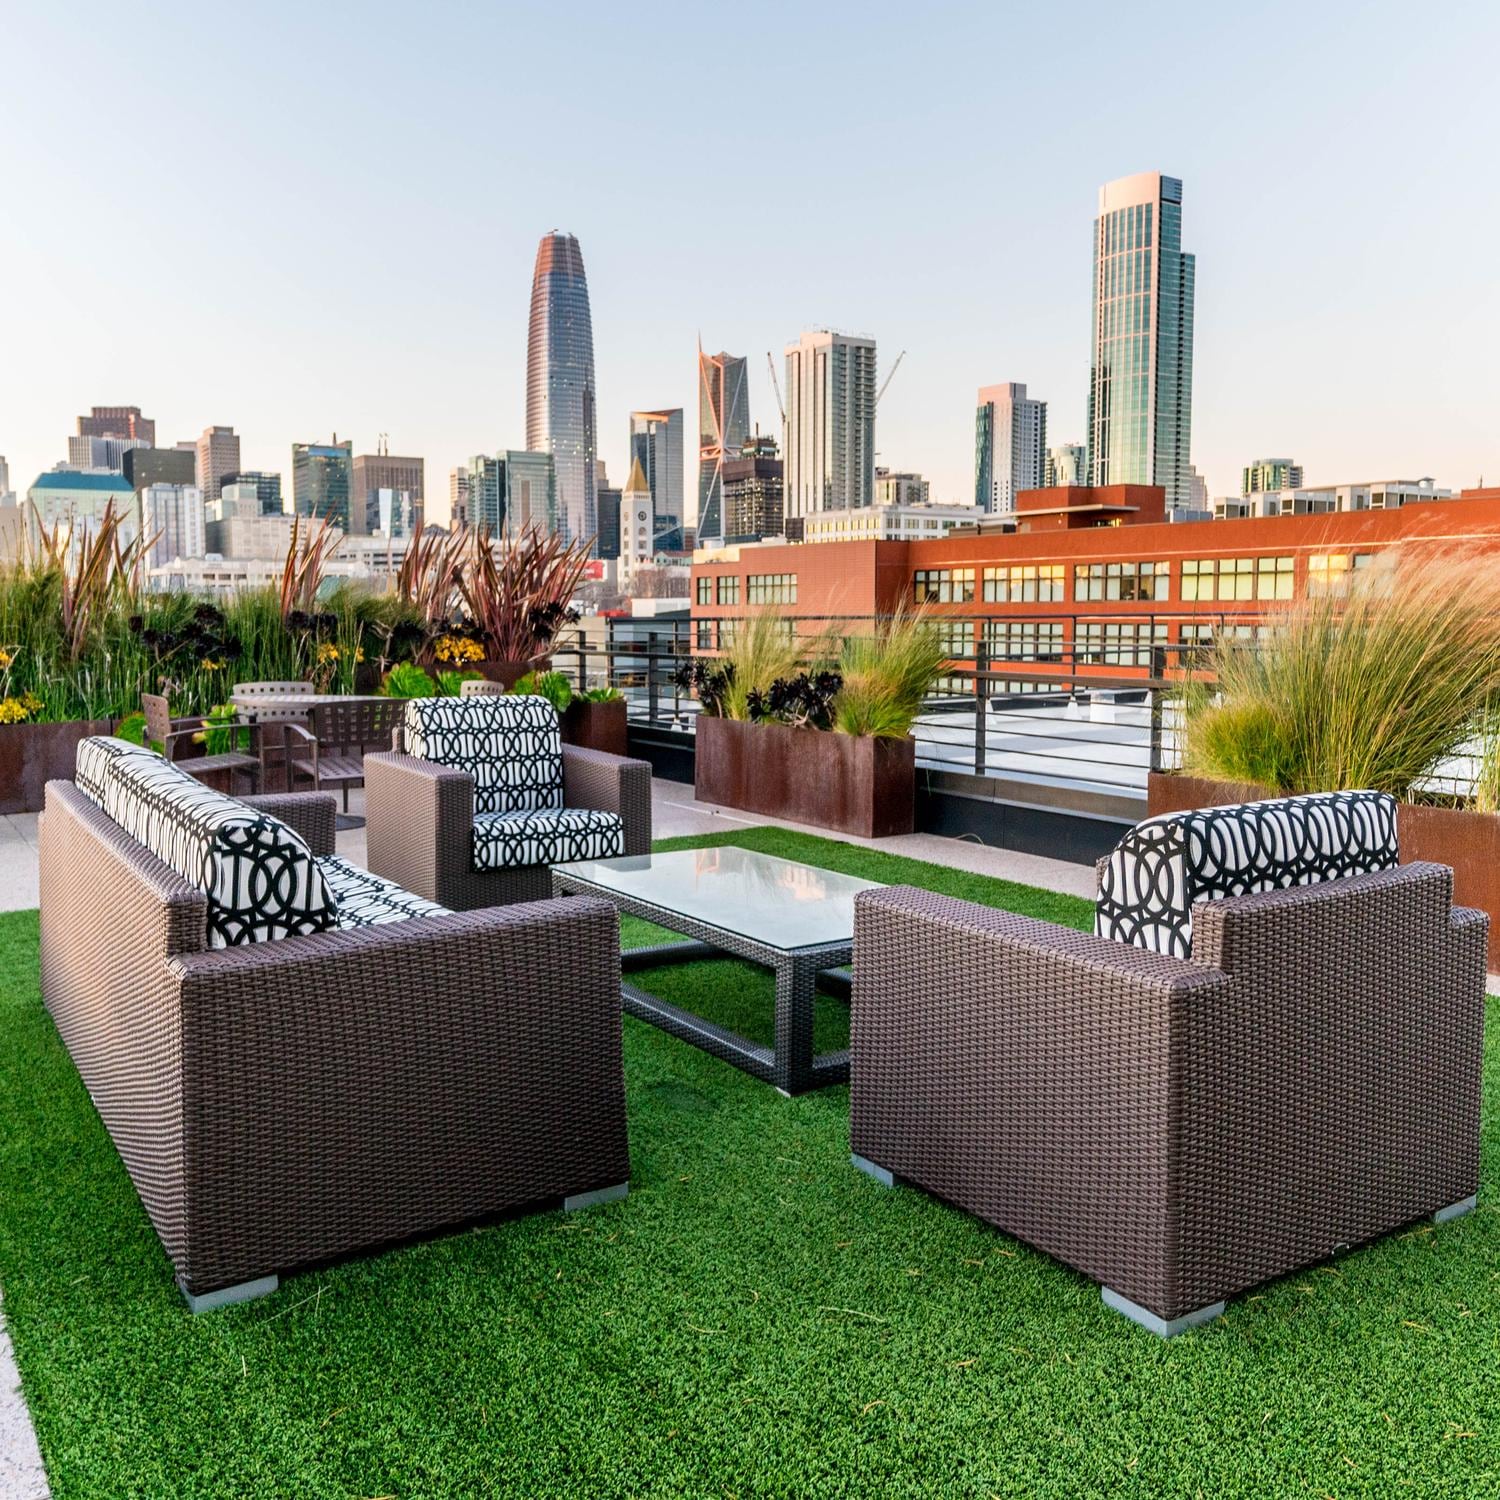 Studio Apartments in South Park CA- Luxurious Rooftop Spa Beside Rooftop Lounge Area